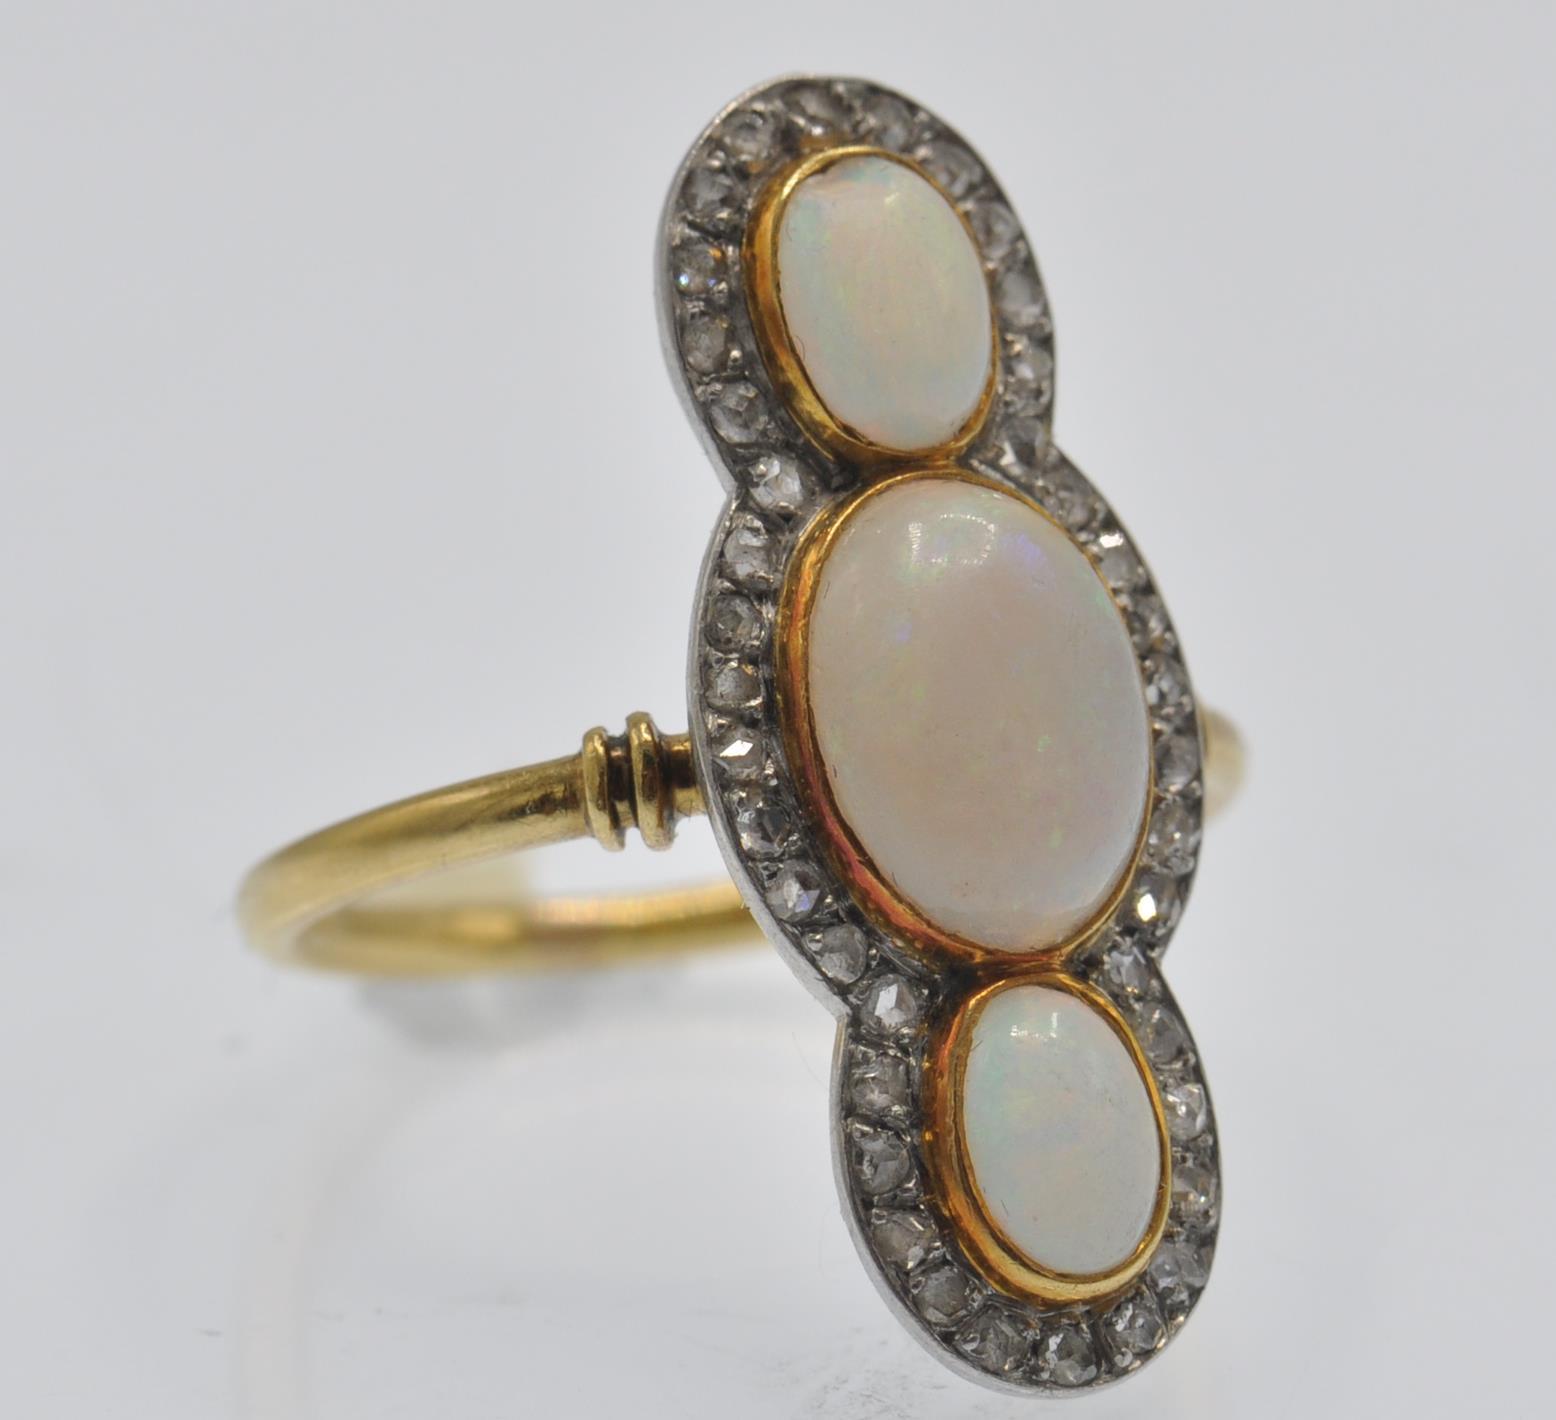 A French 18ct Gold Opal & Diamond 'Up Finger' Ring - Image 4 of 6